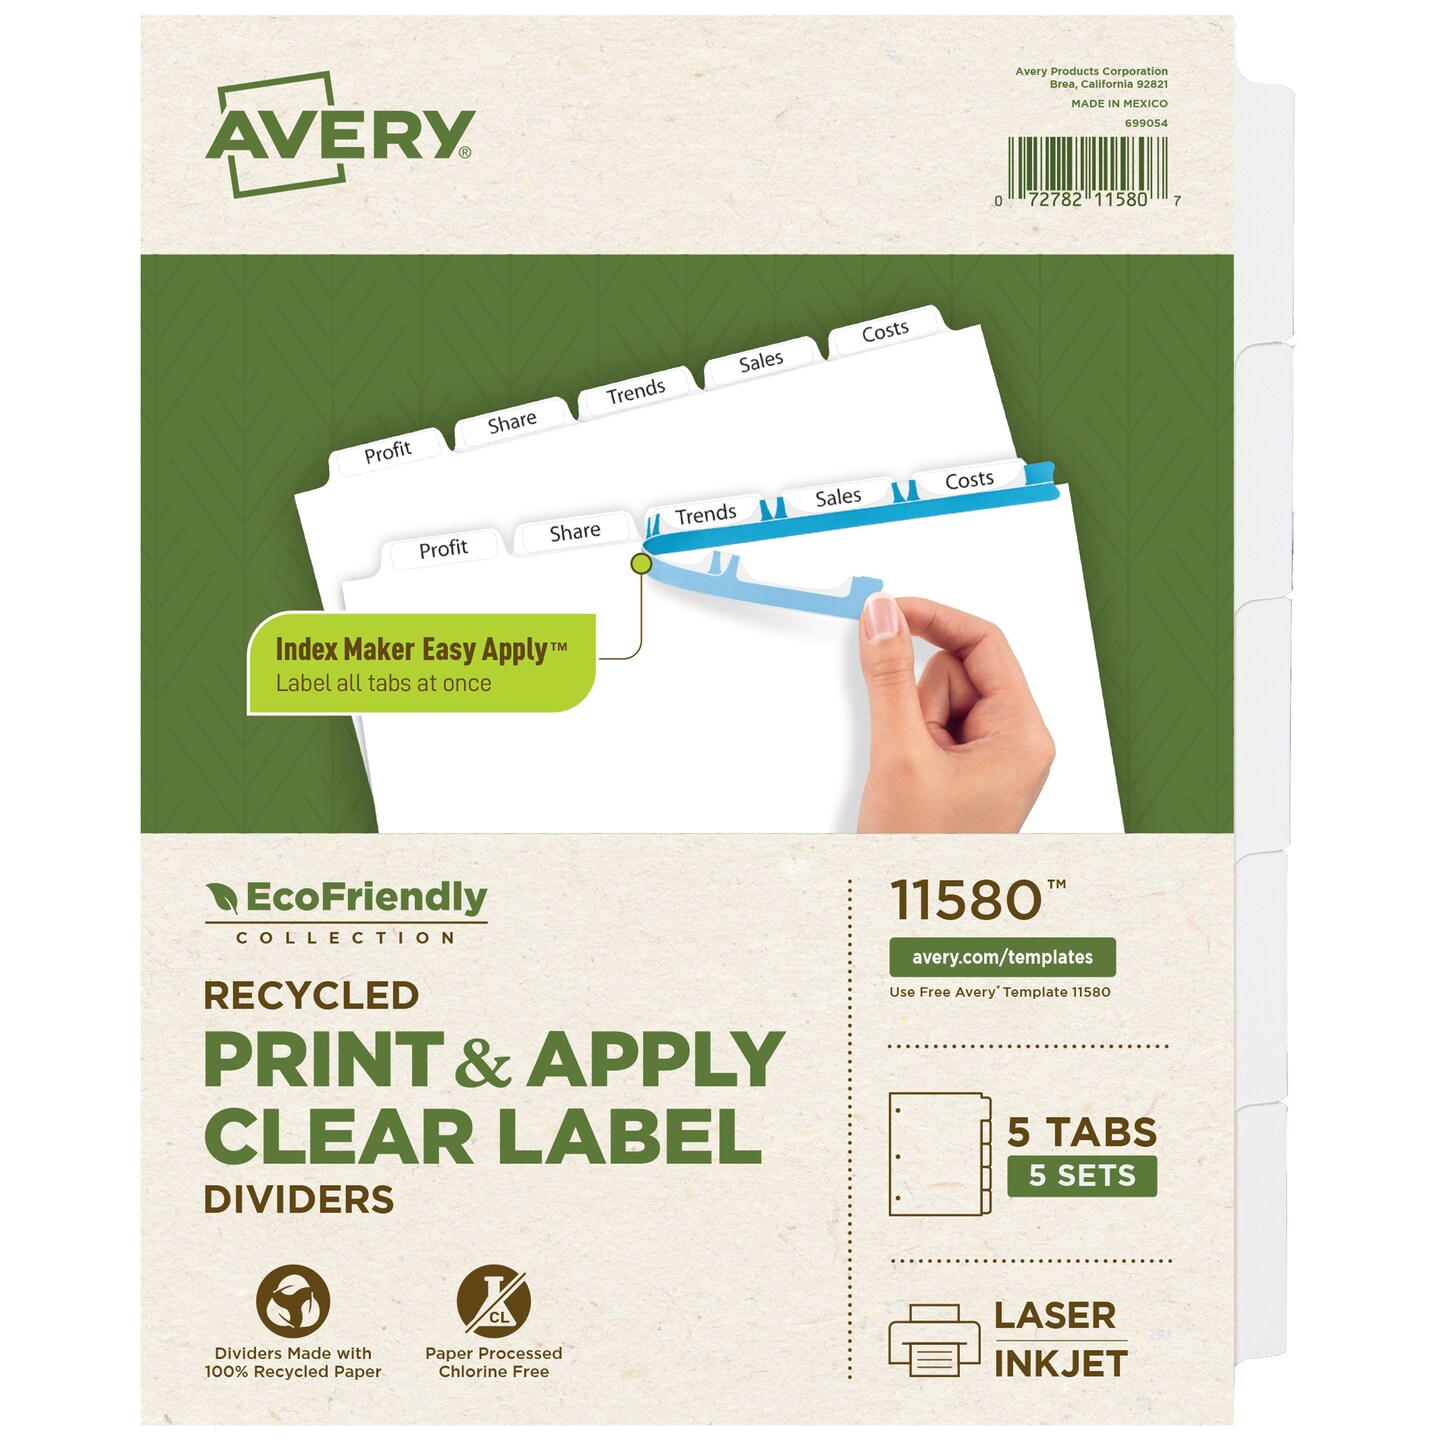 Avery EcoFriendly Recycled Dividers for 3 Ring Binders, 5-Tab, White Tabs, Index Maker Print and Apply Clear Label Strip, 5 Sets for 25 Binder Dividers Total (11580)